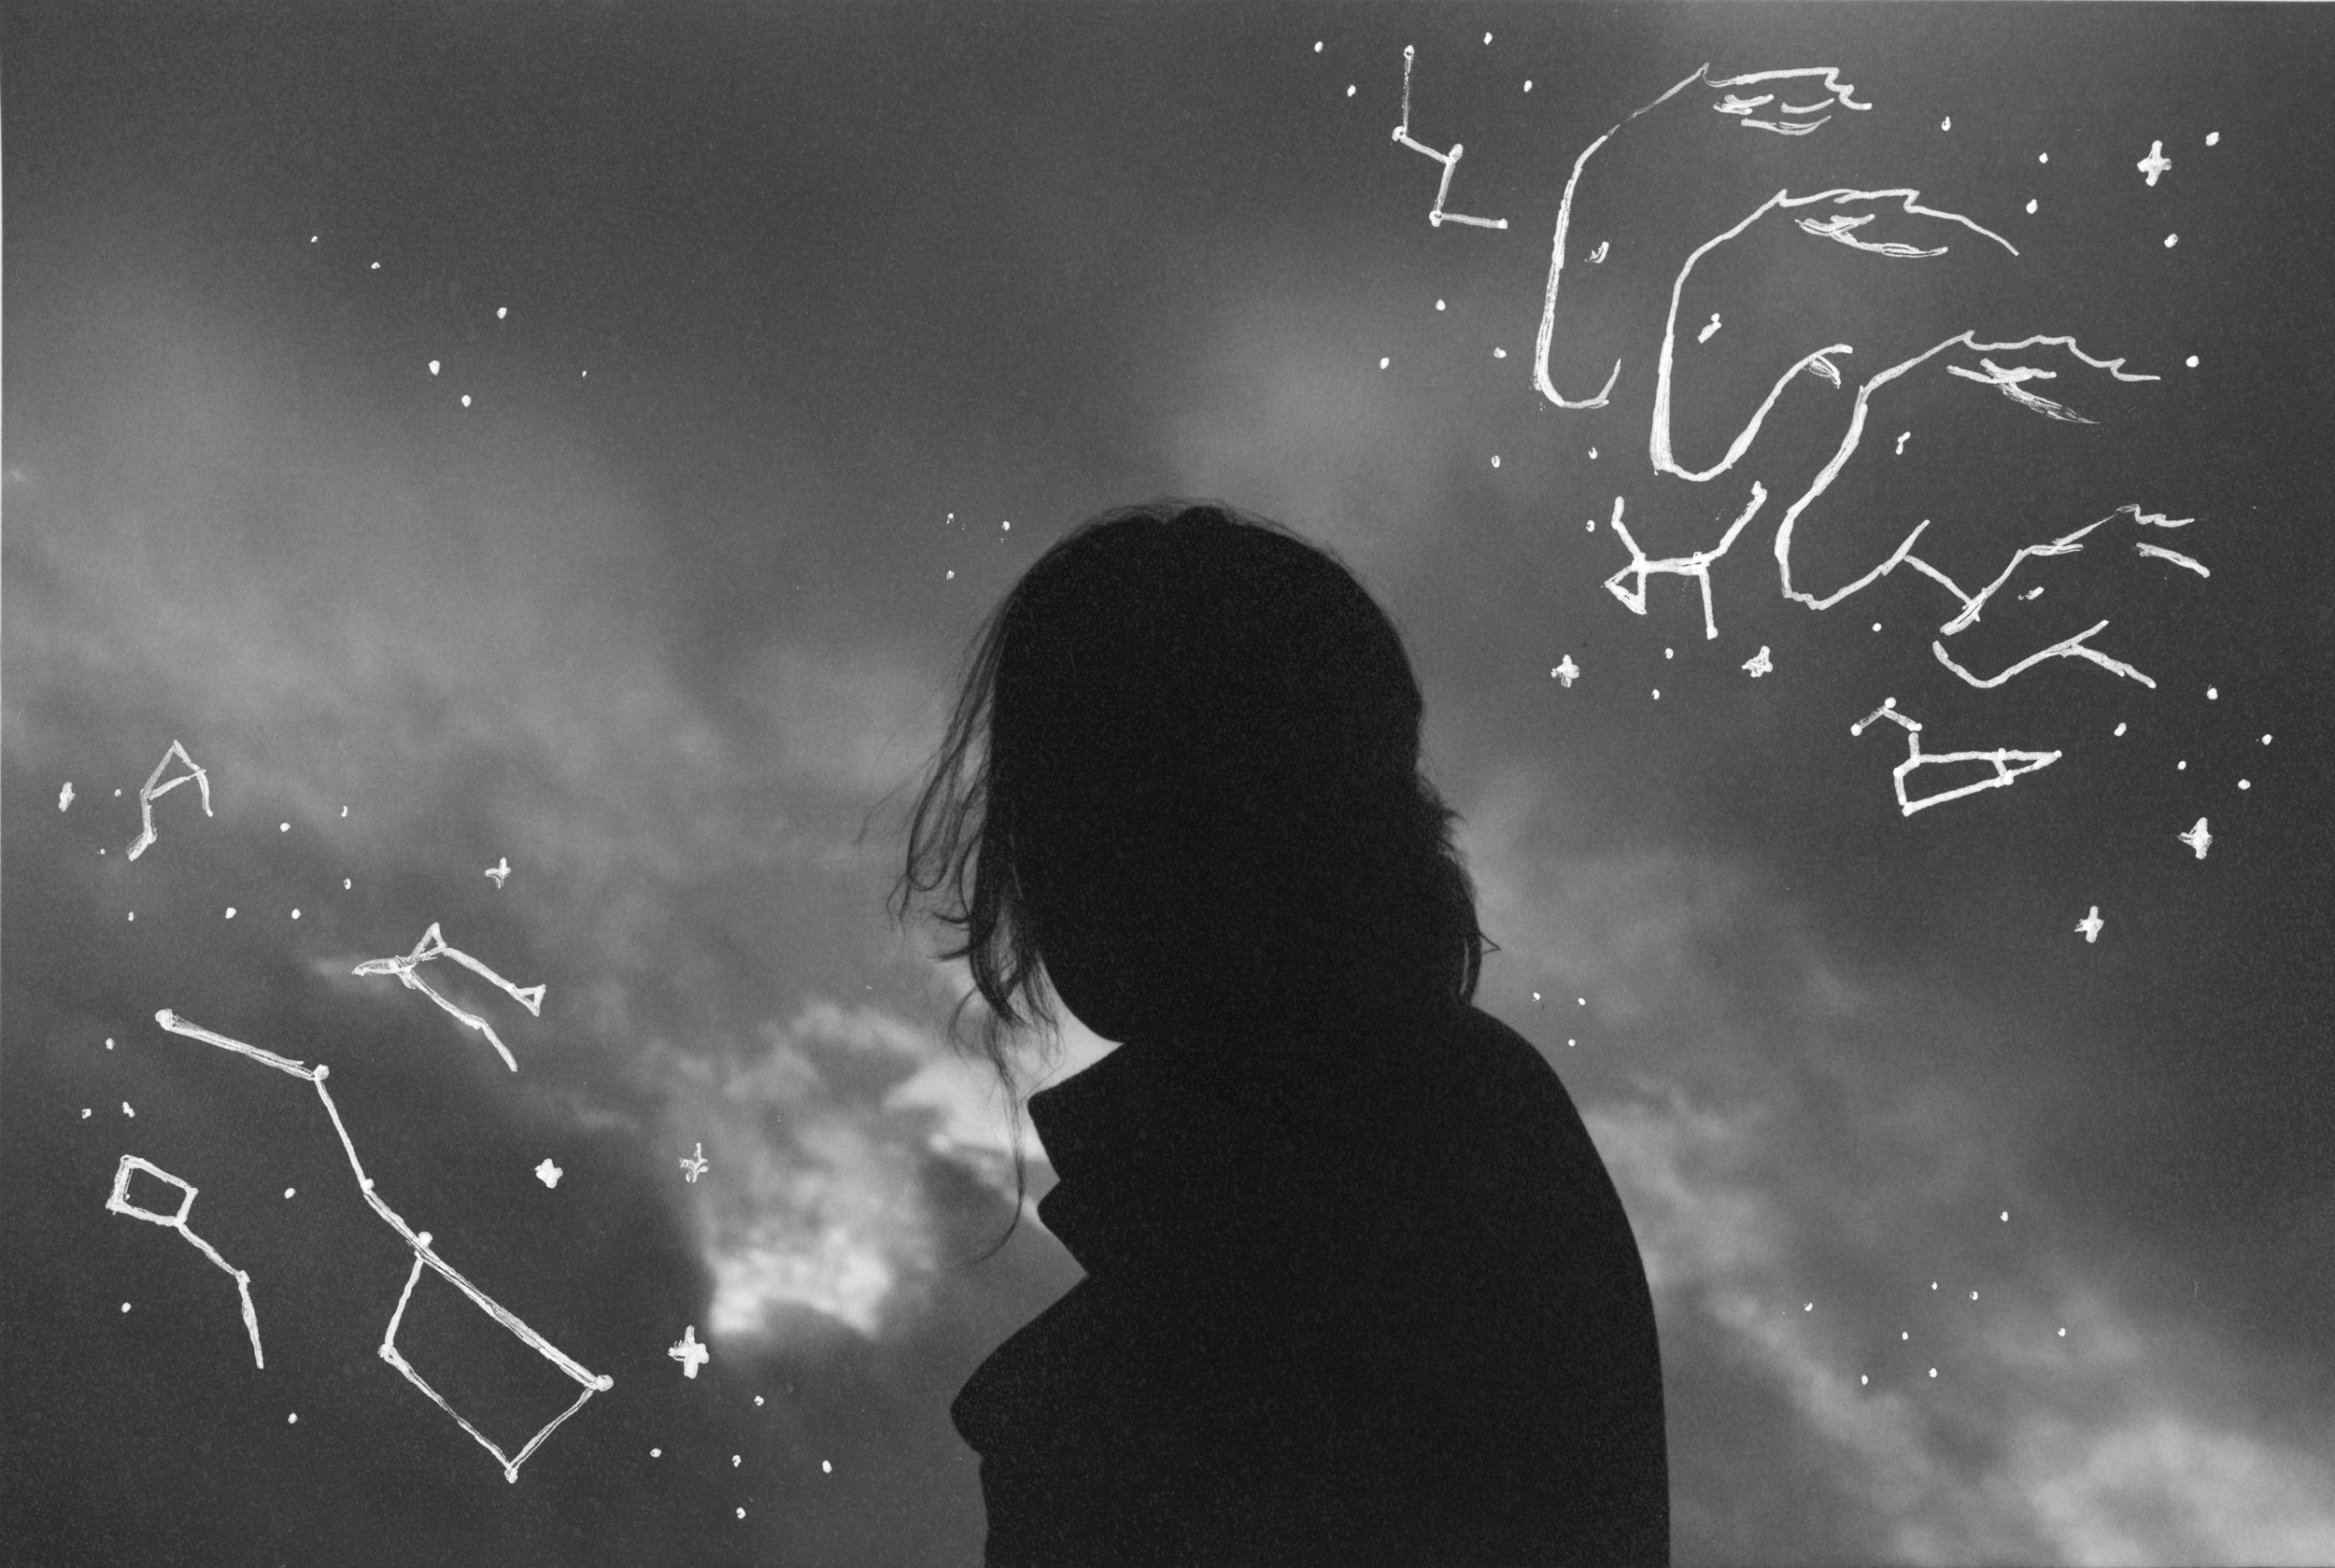 Black and white gelatin silver print of a black silhoette of a woman against a cloudy grey sky. In the sky there are white line drawings of constellations and cave paintings of horses